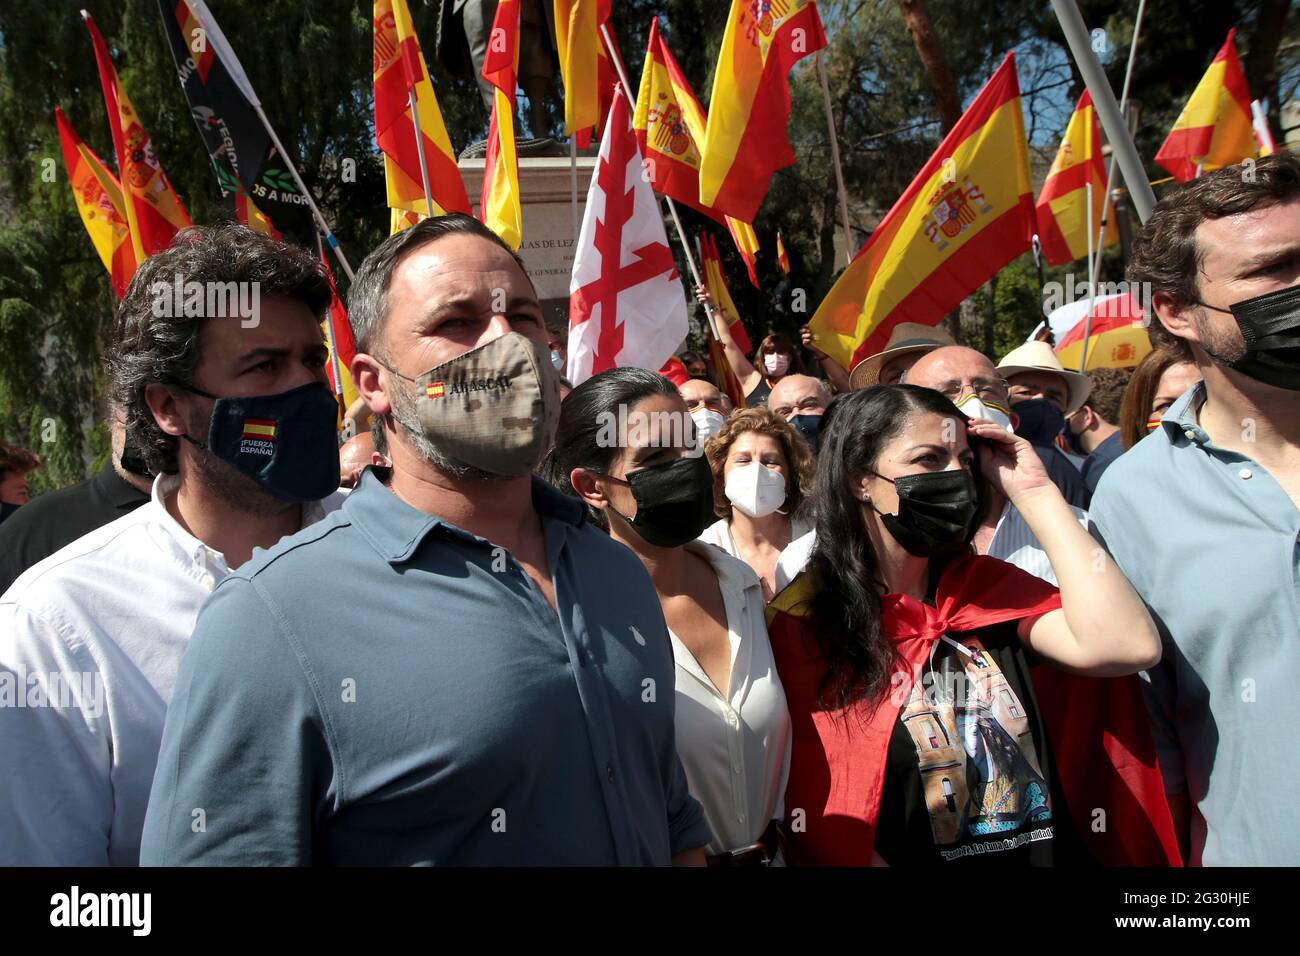 Madrid, Spain; 13.06.2021.- Santiago Abascal (L) leader of Vox the politician with the greatest presence in the demonstration in the Plaza de Colon, at the monument to the Spanish admiral Blas de Lezo, who was one-eyed, lame and one-eyed. 'Unión 78' platform led by the Spanish politician Rosa Díez, the group that convened the meeting of the far-right in the Plaza de Colón in Madrid, to protest the possible pardons to the imprisoned Catalan independence politicians. Among thousands of people who filled the square and the adjacent streets with Spanish flags, the attendees shouted slogans such as Stock Photo